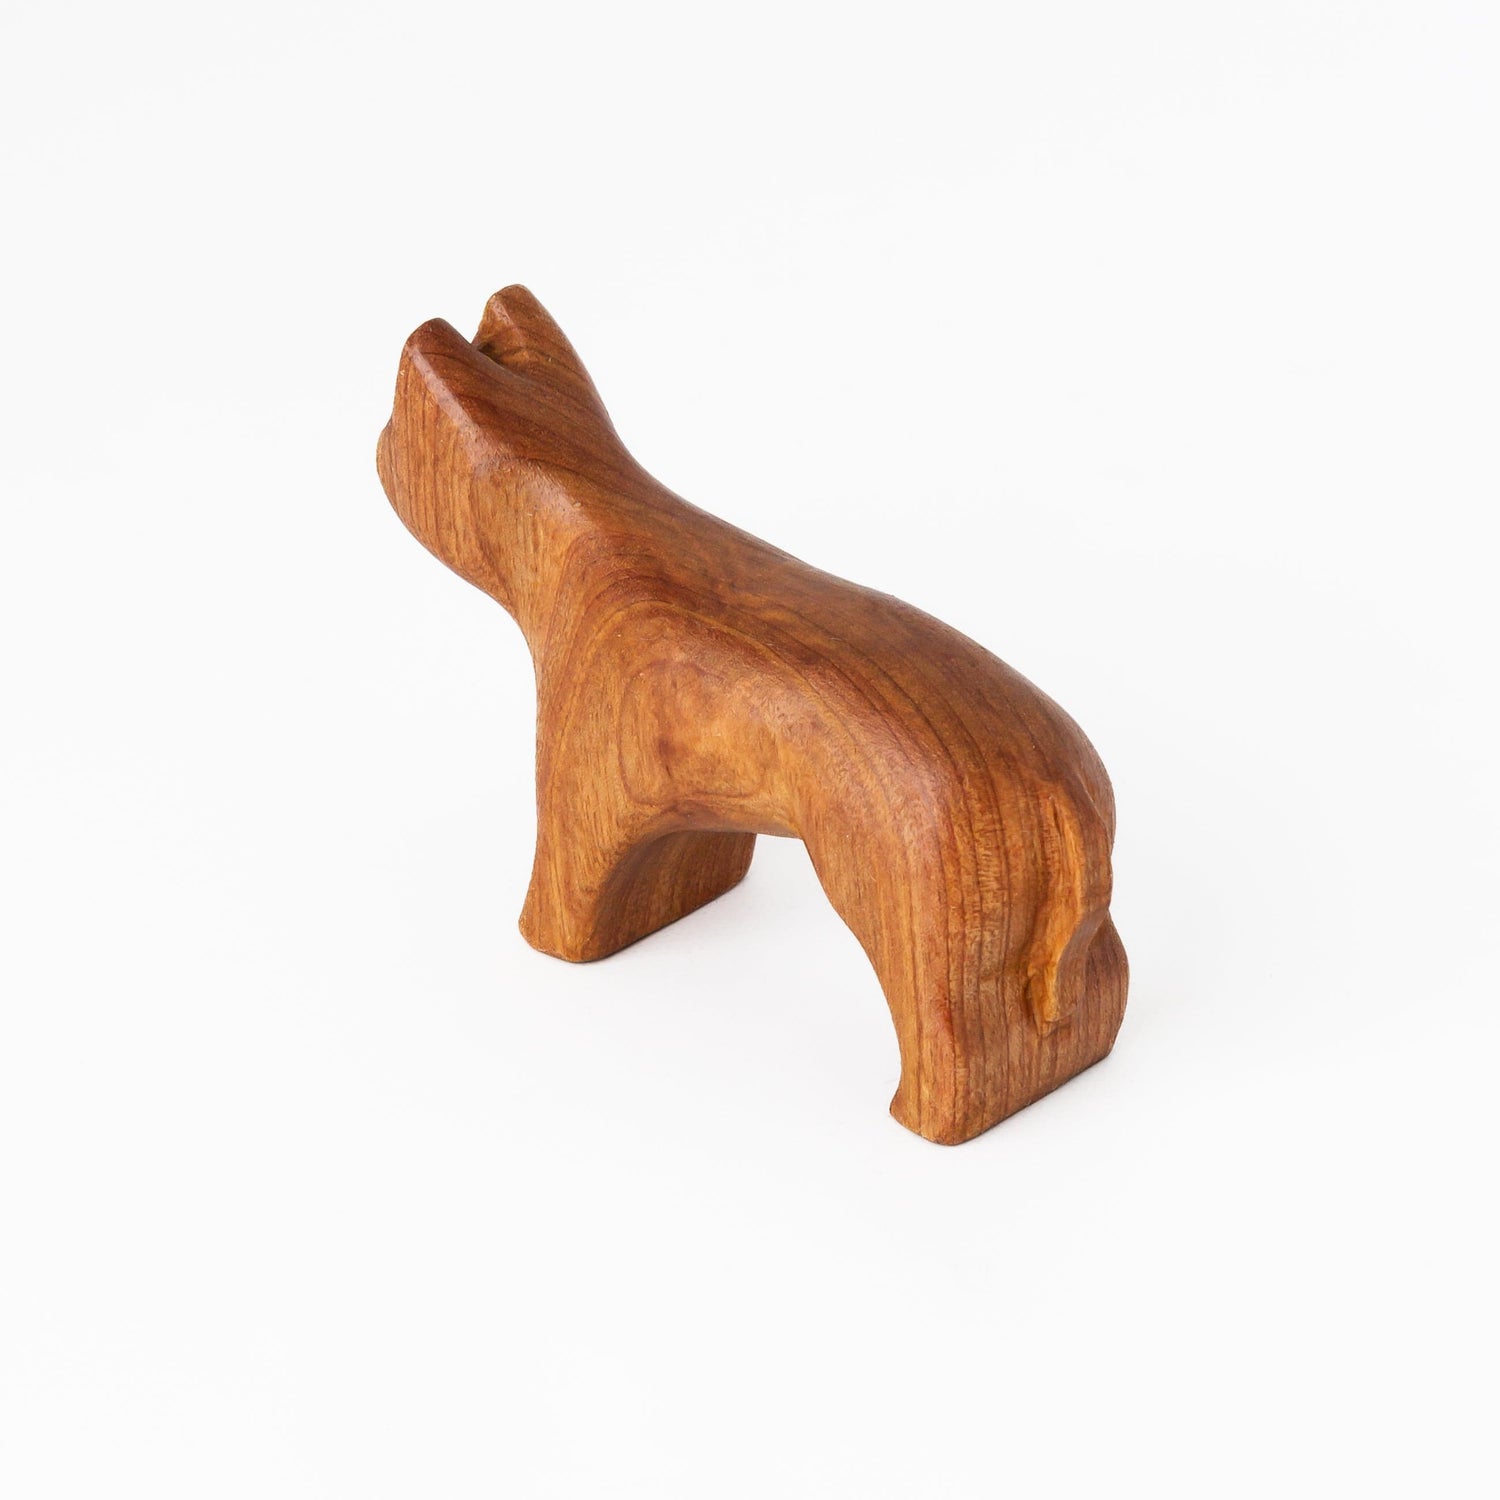 Bumbleberry Toys Wooden Animals "Louise Lioness" Wooden Animal Toy (Handmade in Canada)